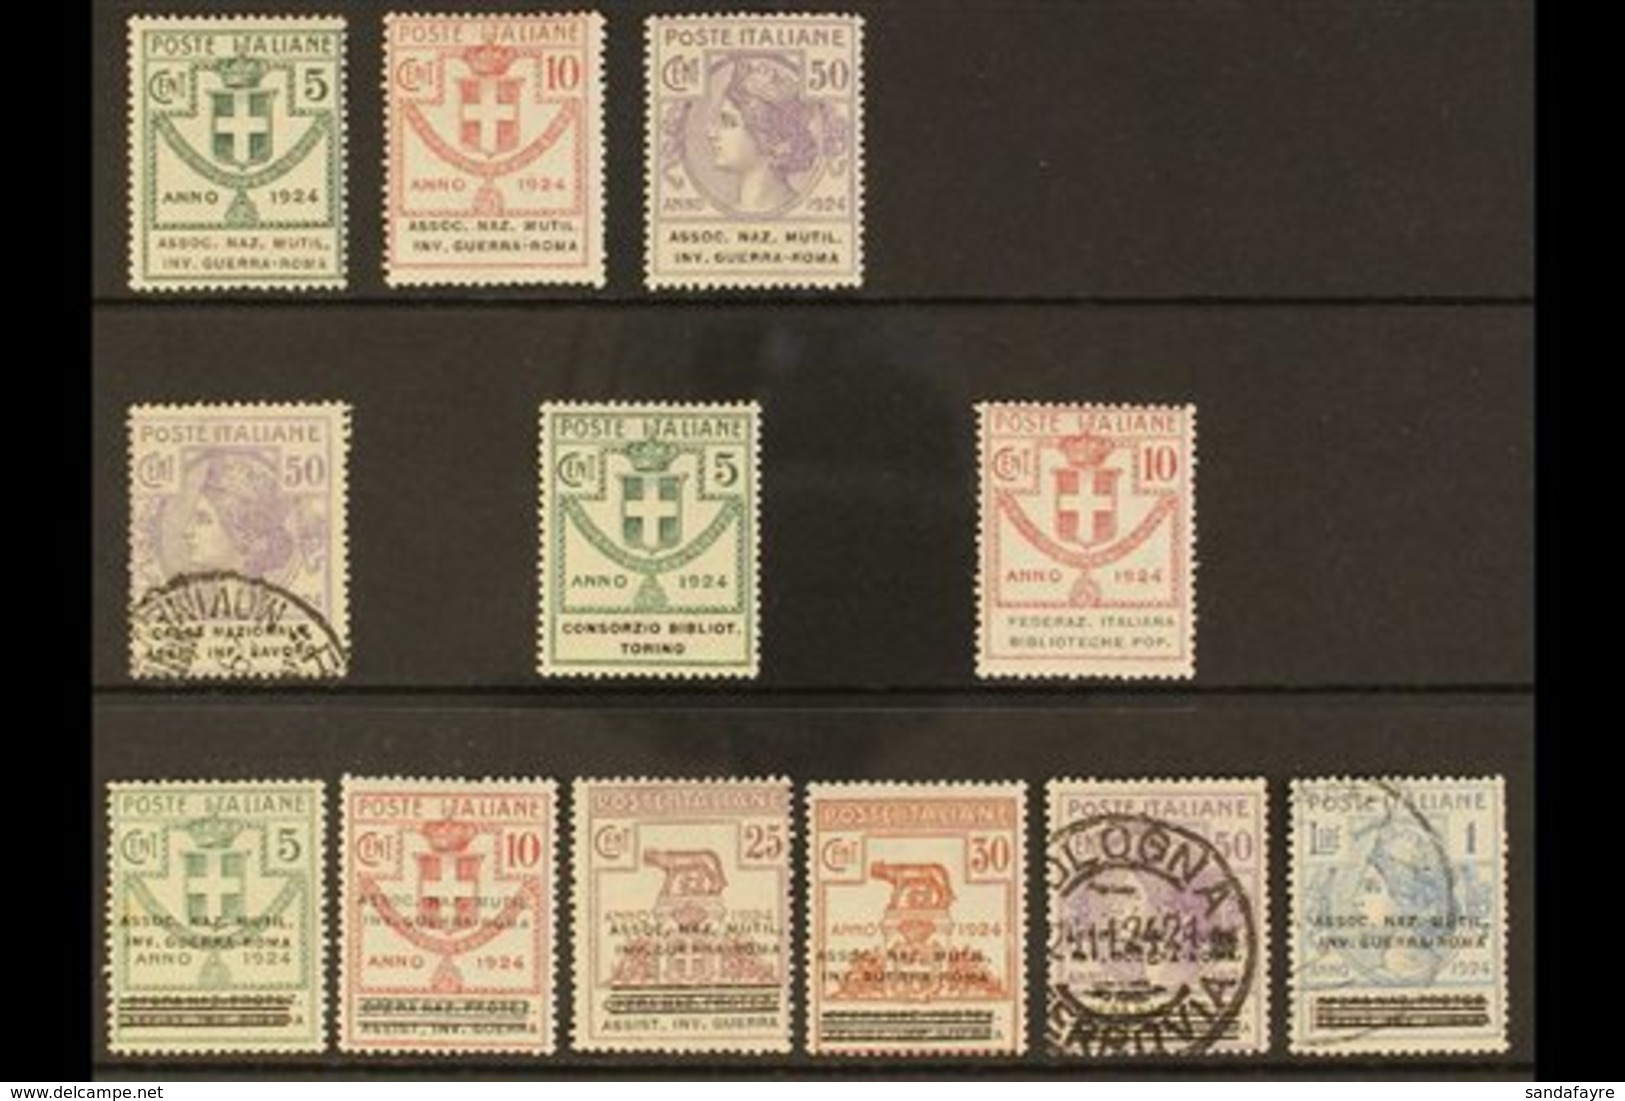 FRANCHISE STAMPS 1924 Mint & Used All Different Group On A Stock Card, Includes Assoc. Naz. Mutil. Inv. Guerra - Roma, C - Unclassified